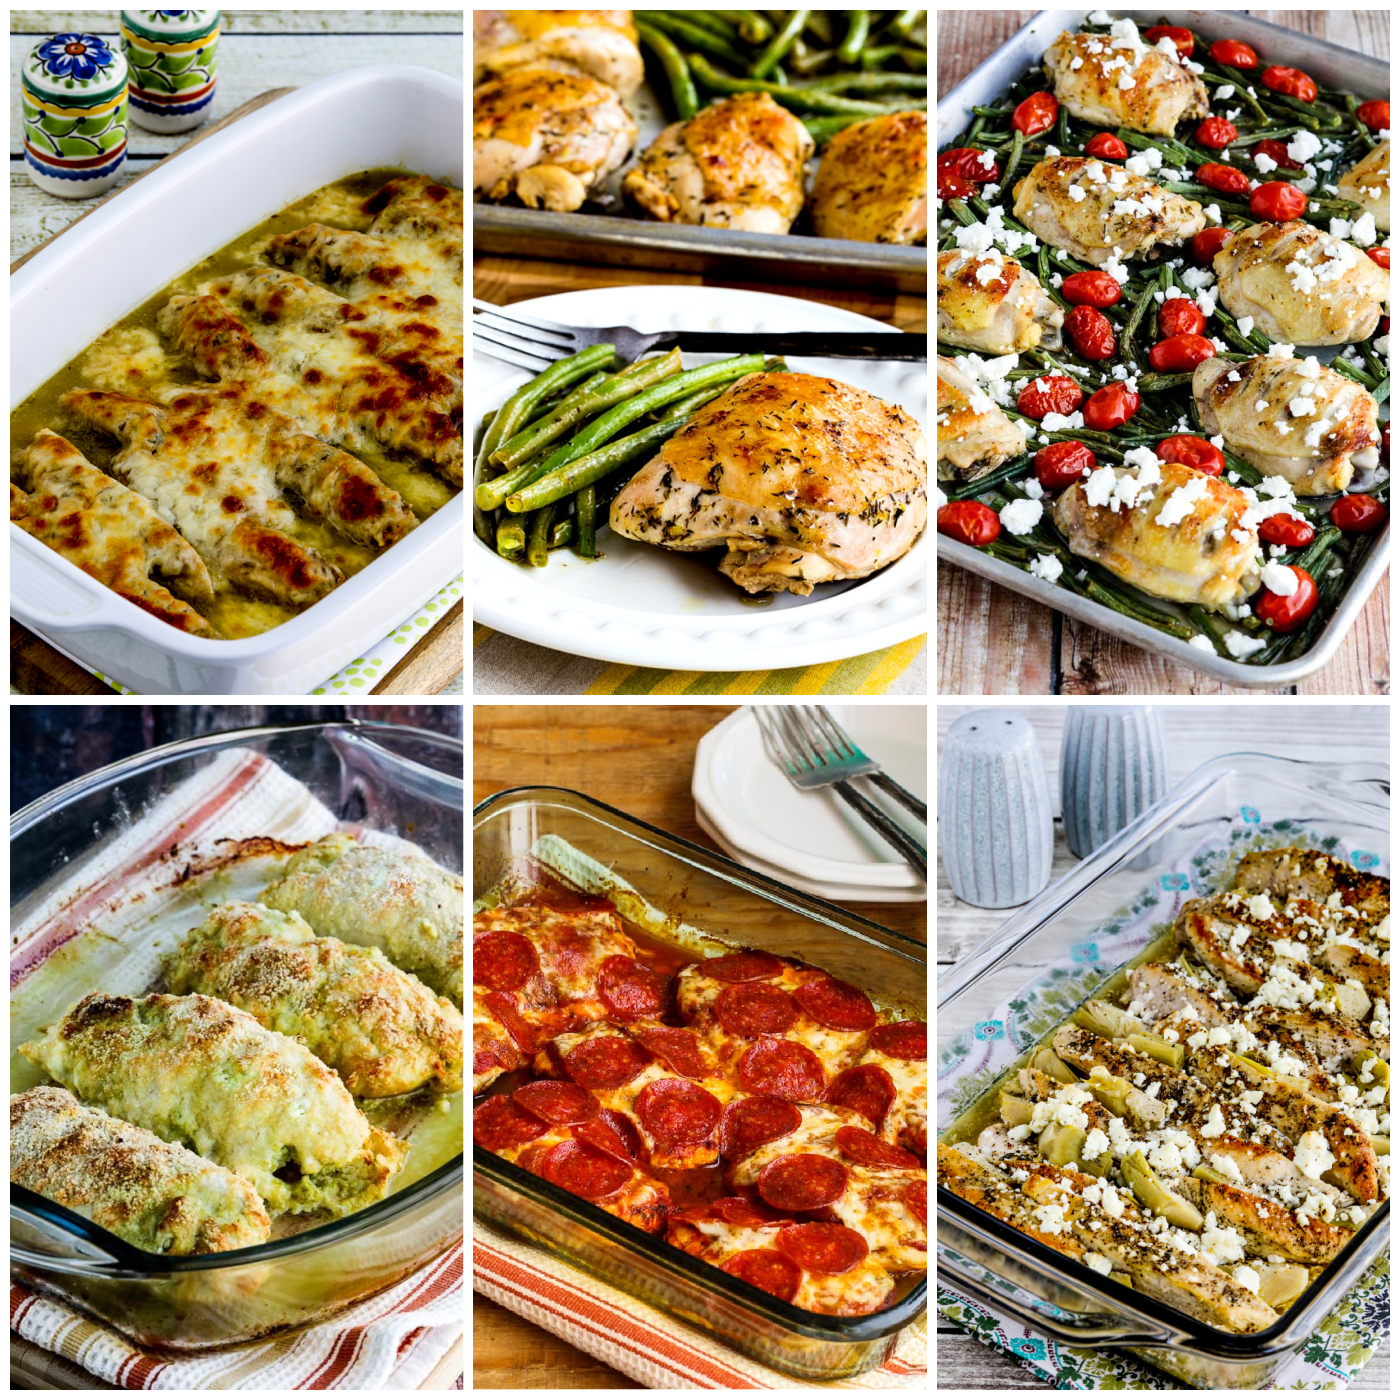 Low-Carb and Keto Baked Chicken Recipes collage of featured recipes